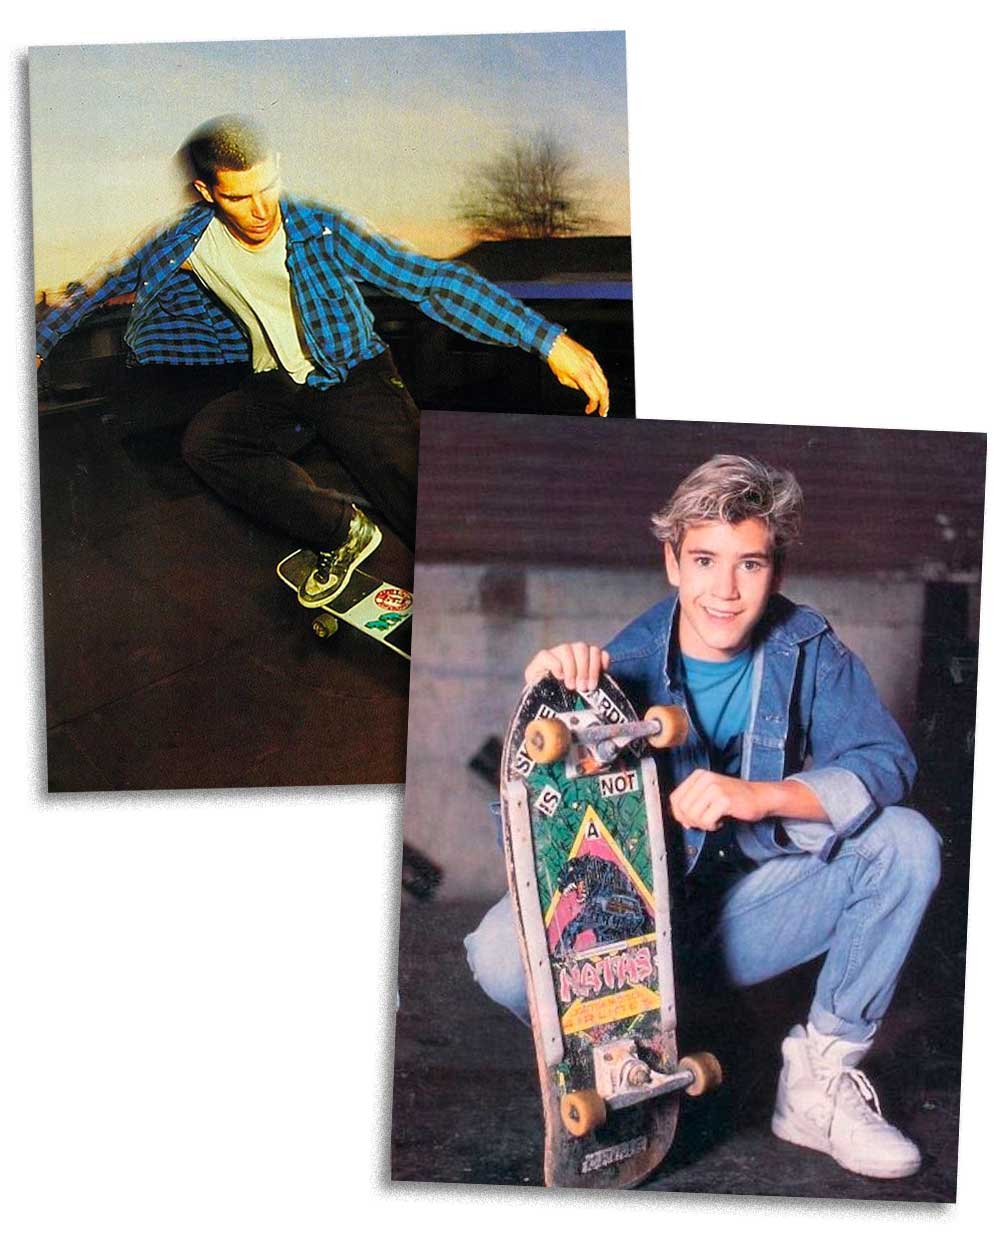 Skater Style of the 80s for Boys